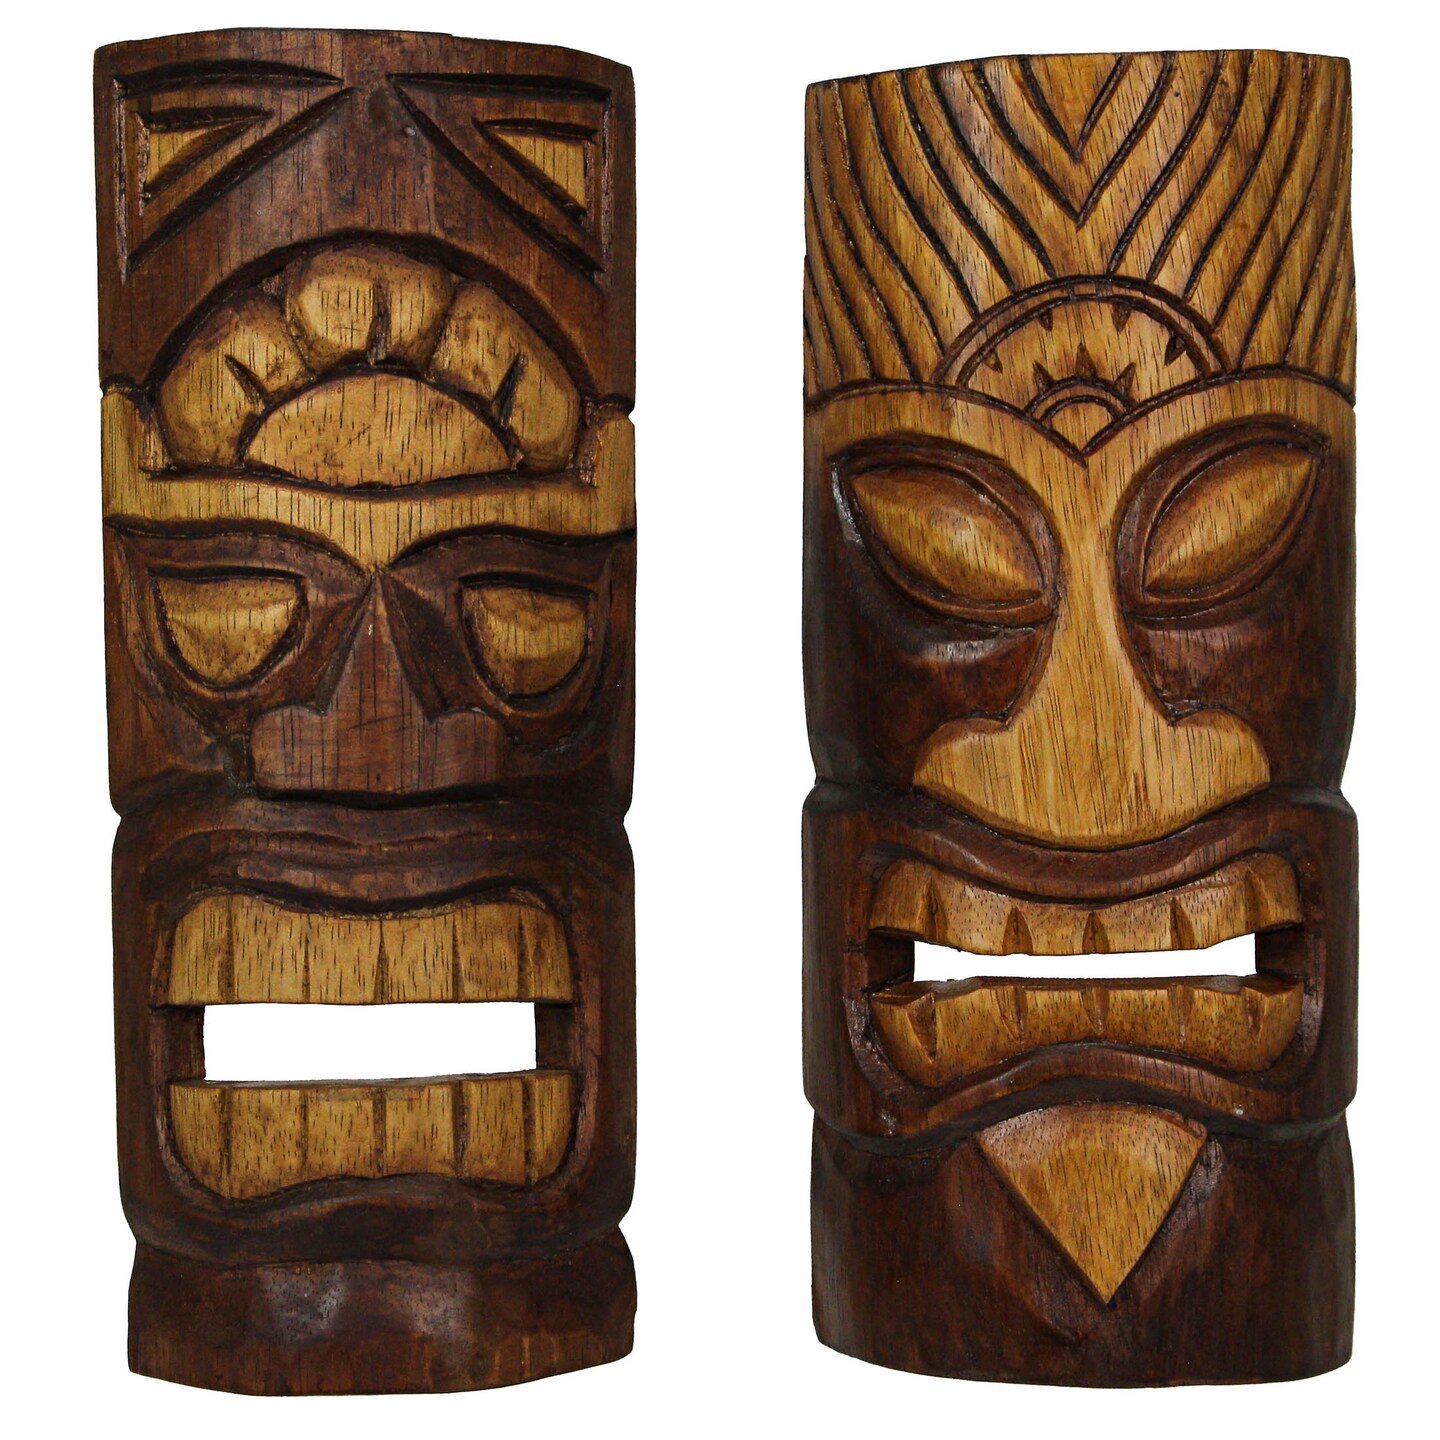 12 Inch Natural Wood Hand Carved Tiki Mask Wall Art Tropical Beach Home Set of 2